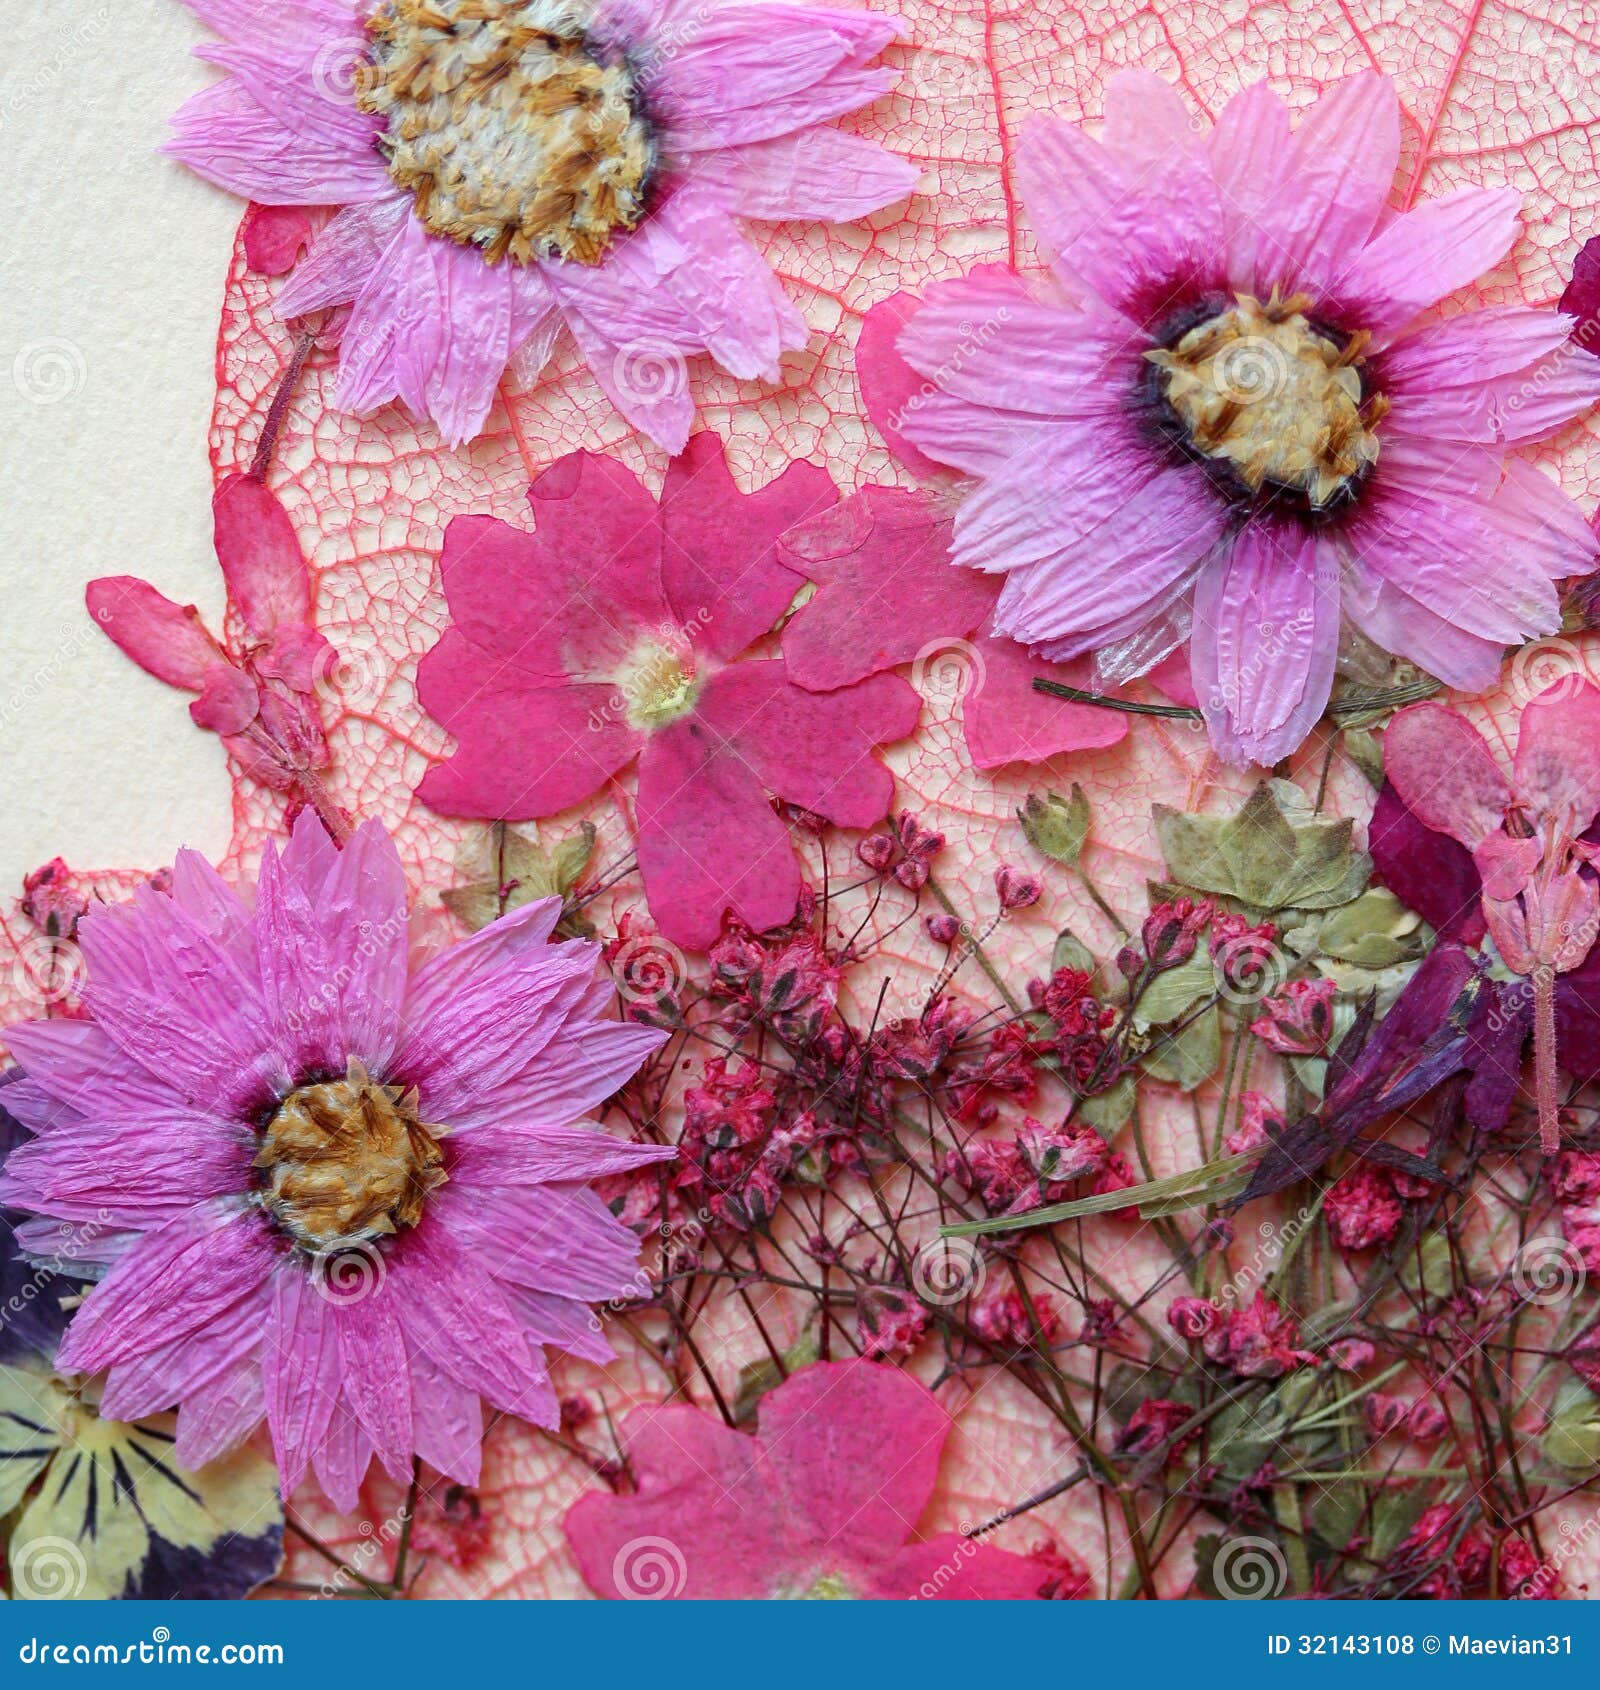 Dried Pressed Flowers Pink Royalty-Free Images, Stock Photos & Pictures